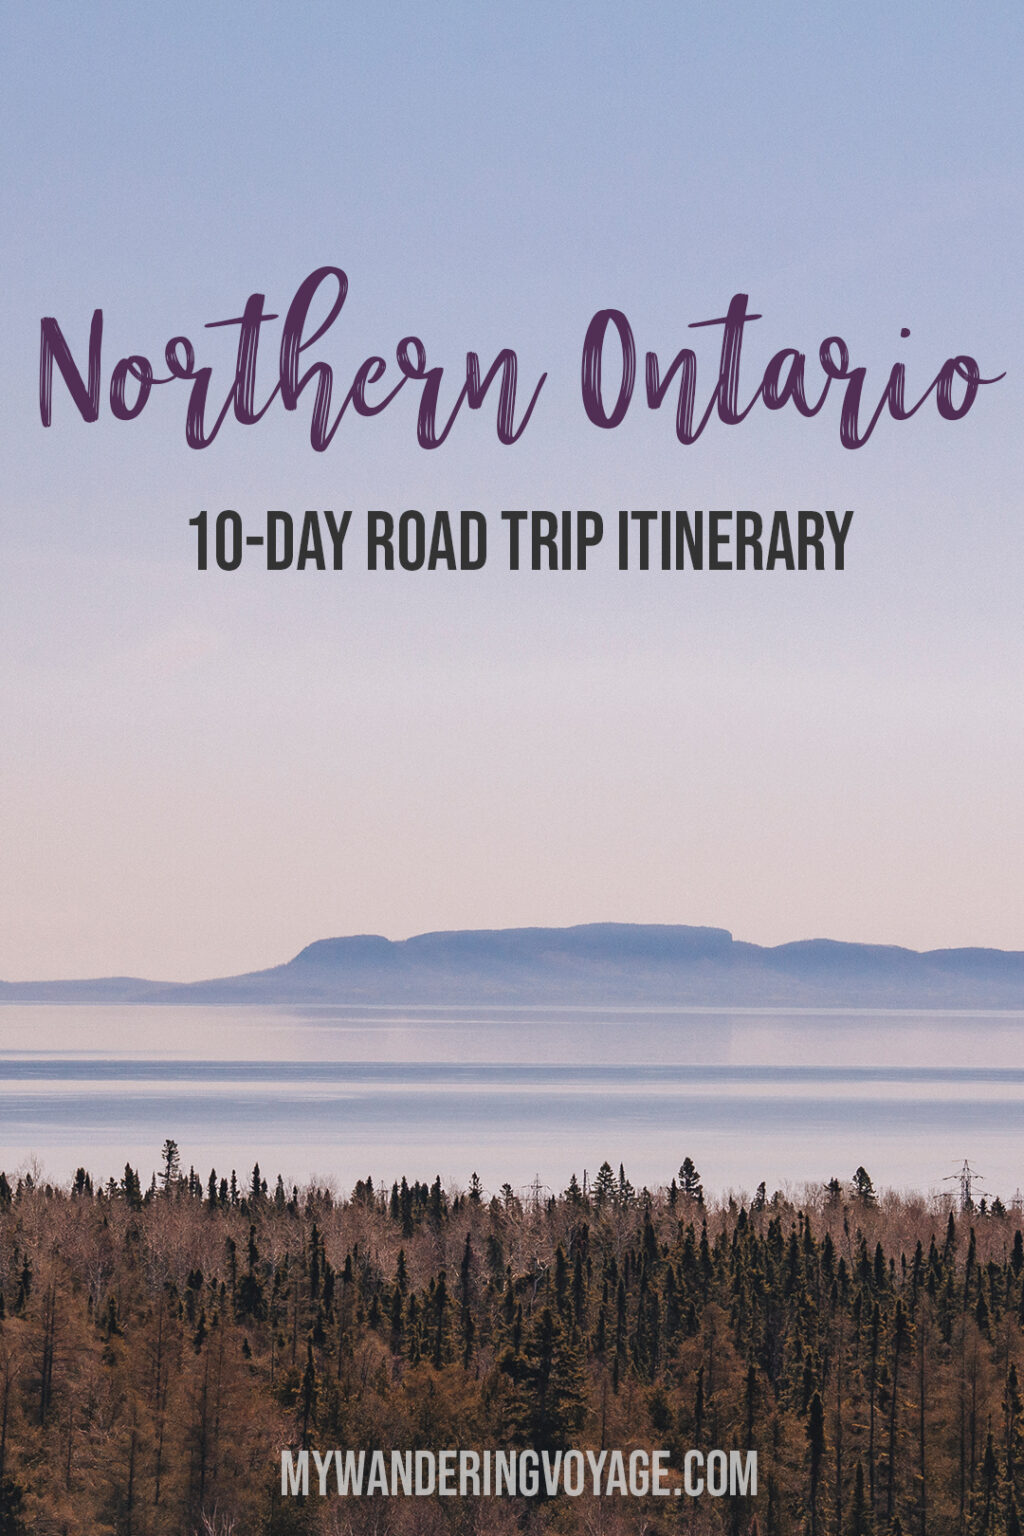 northern ontario road trip itinerary